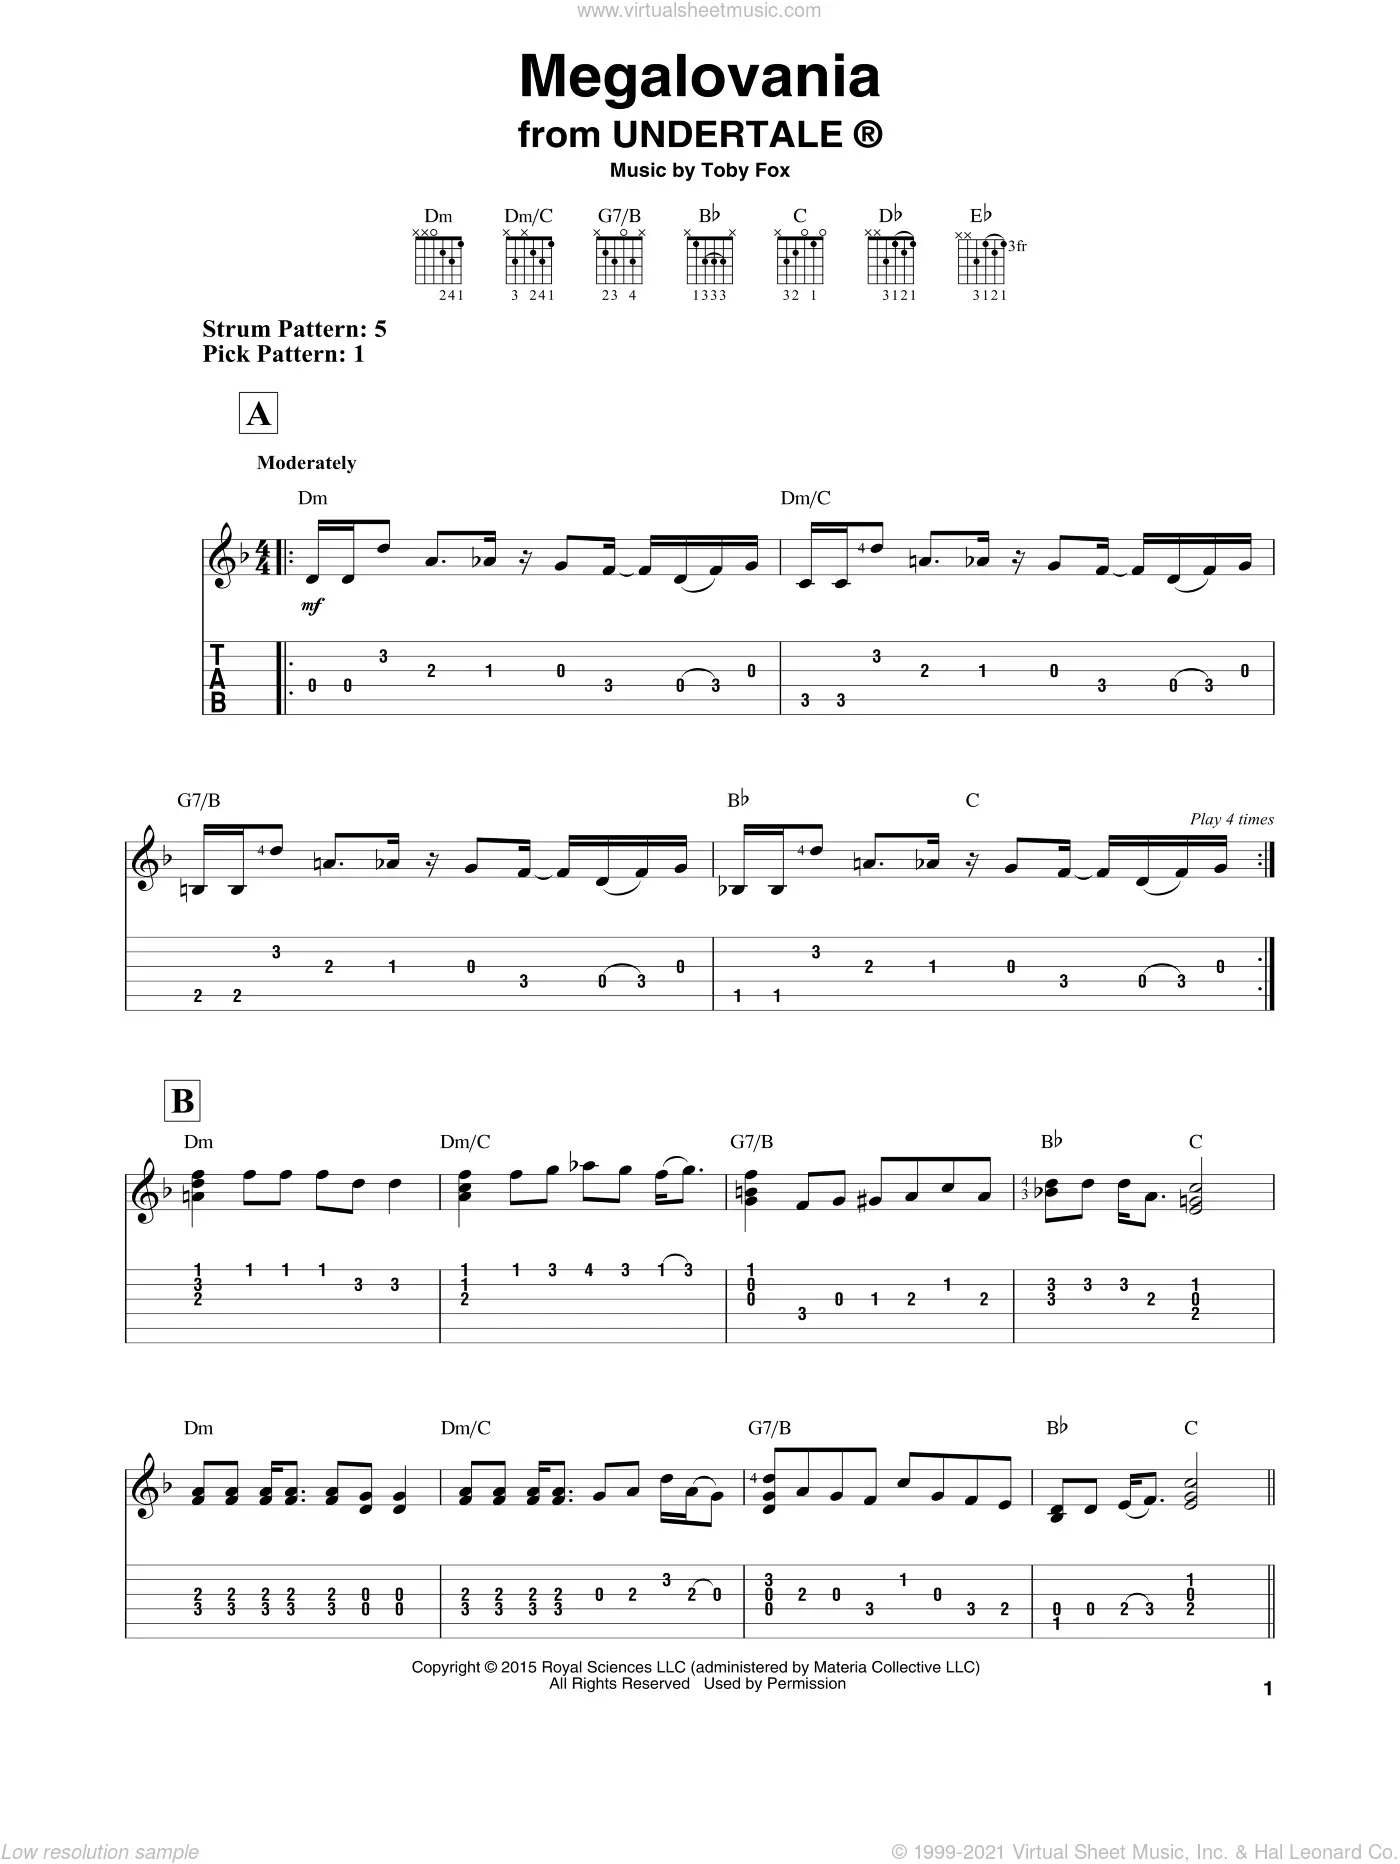 Toby Fox Music Sheets, Music Artists